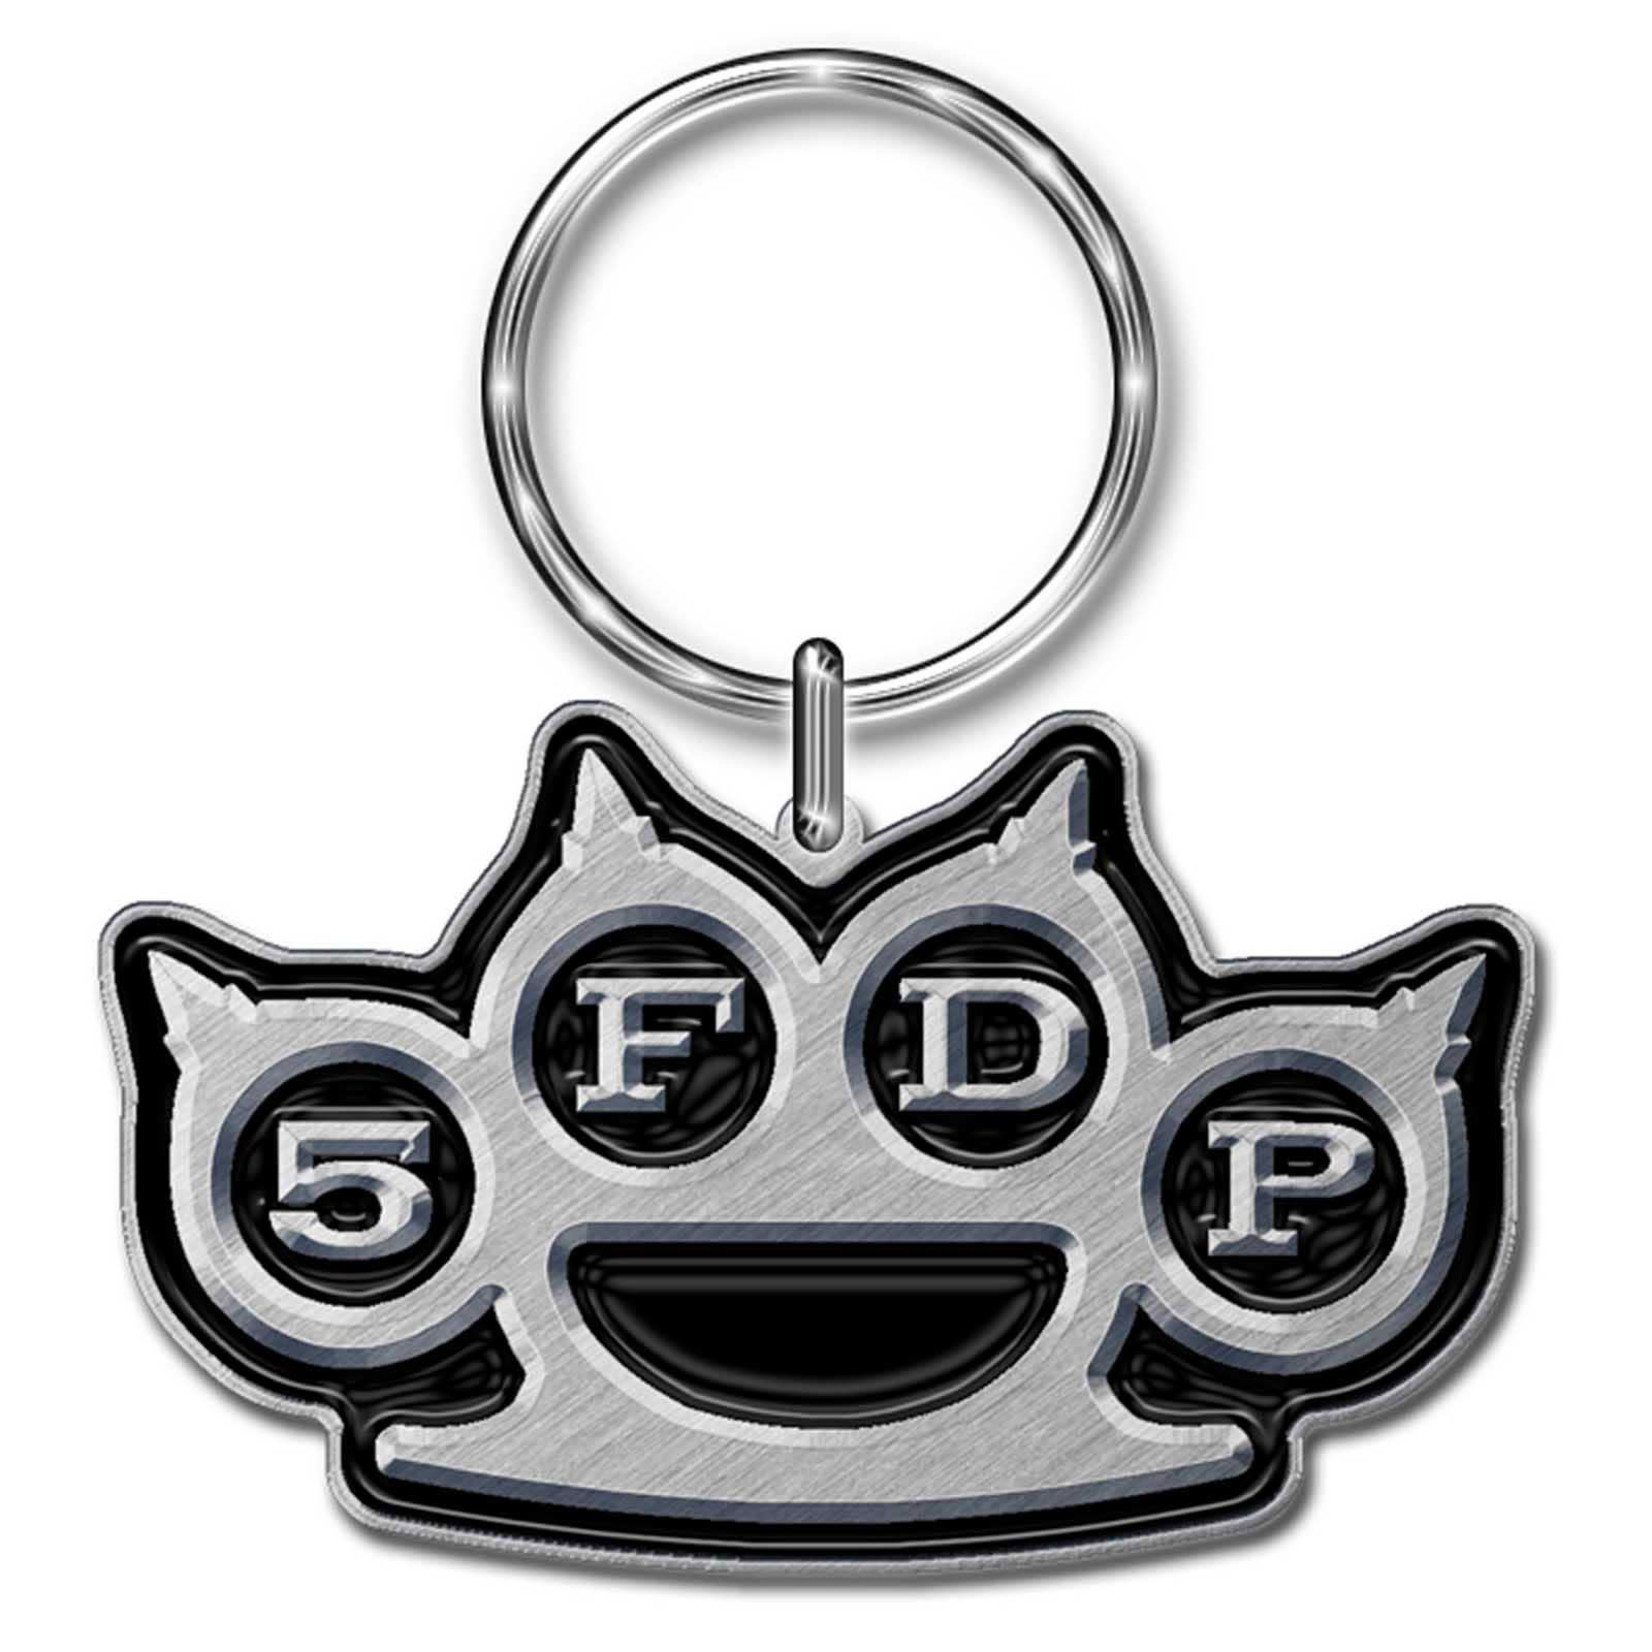 Keychain - Five Finger Death Punch: Knuckles